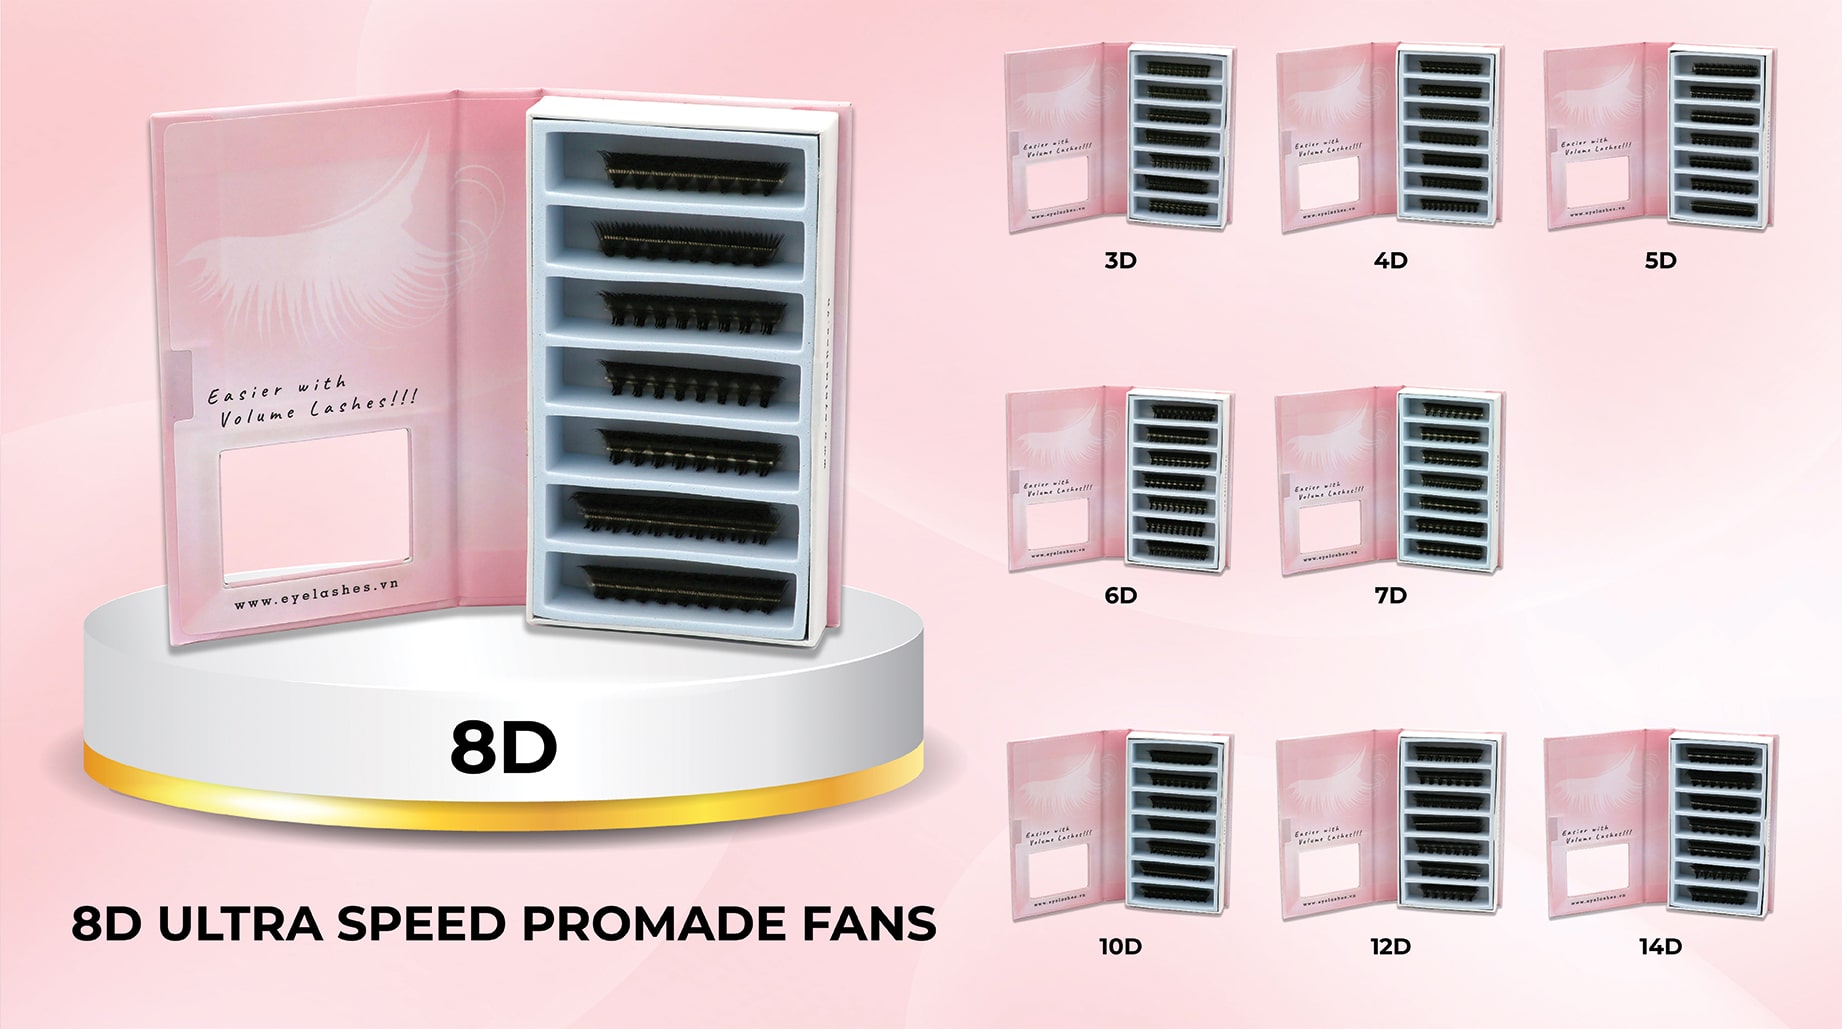 Ultra-Speed-8D-promade-fan-wholesale-eyelash-supplier-VNLASHES